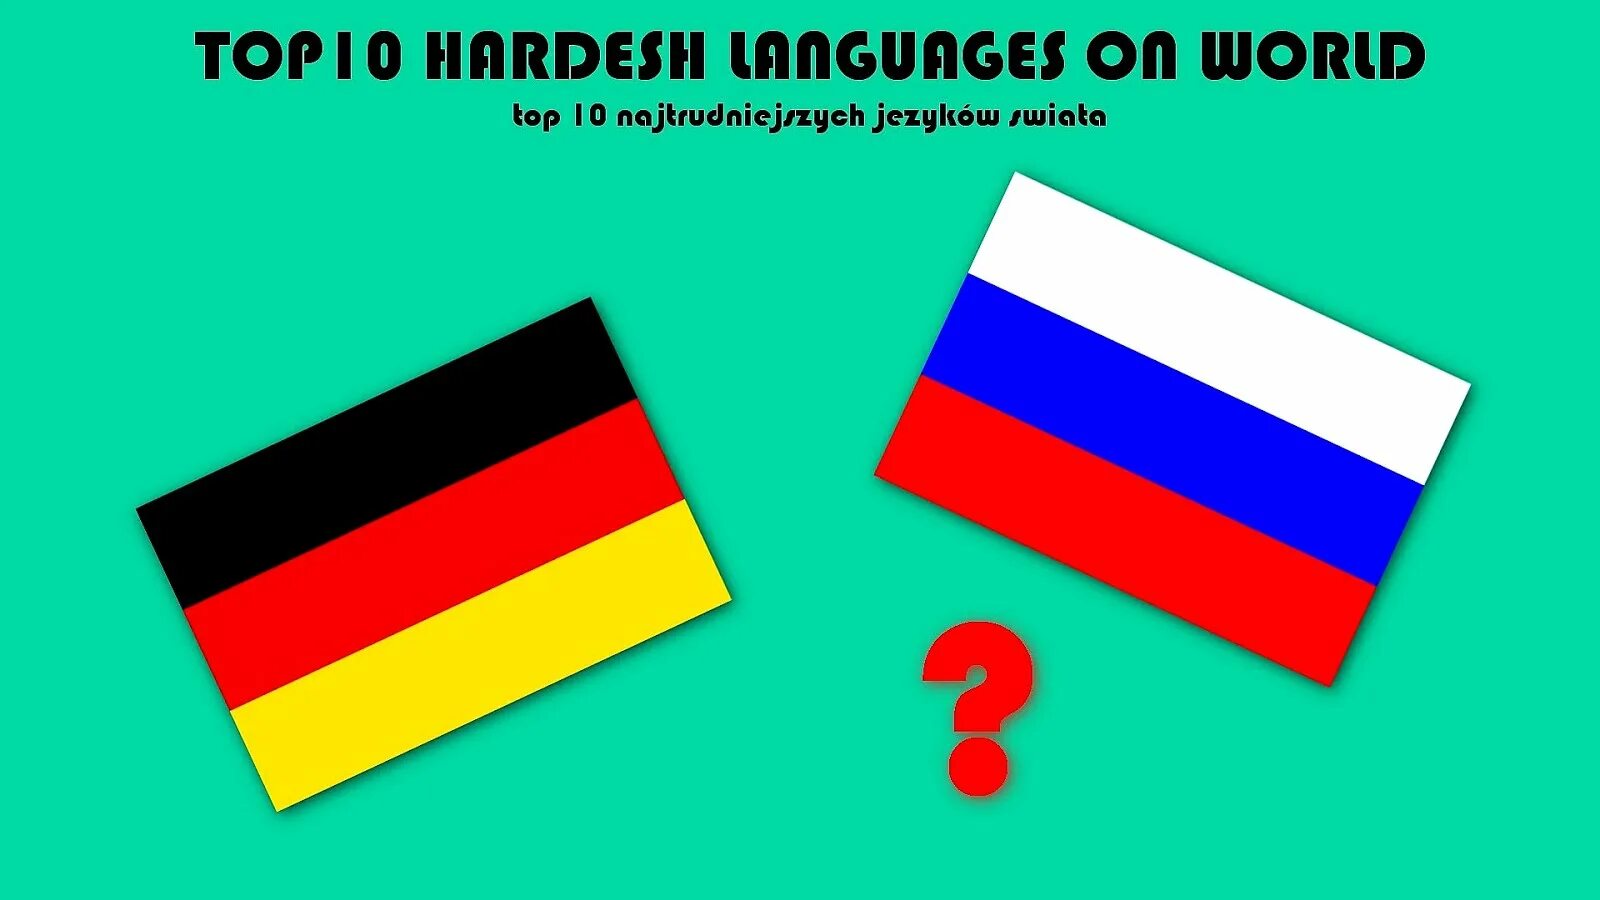 Most difficult languages to learn. Hardest languages in the World. The hardest languages. Hardest languages to learn. Most hard languages in the World.